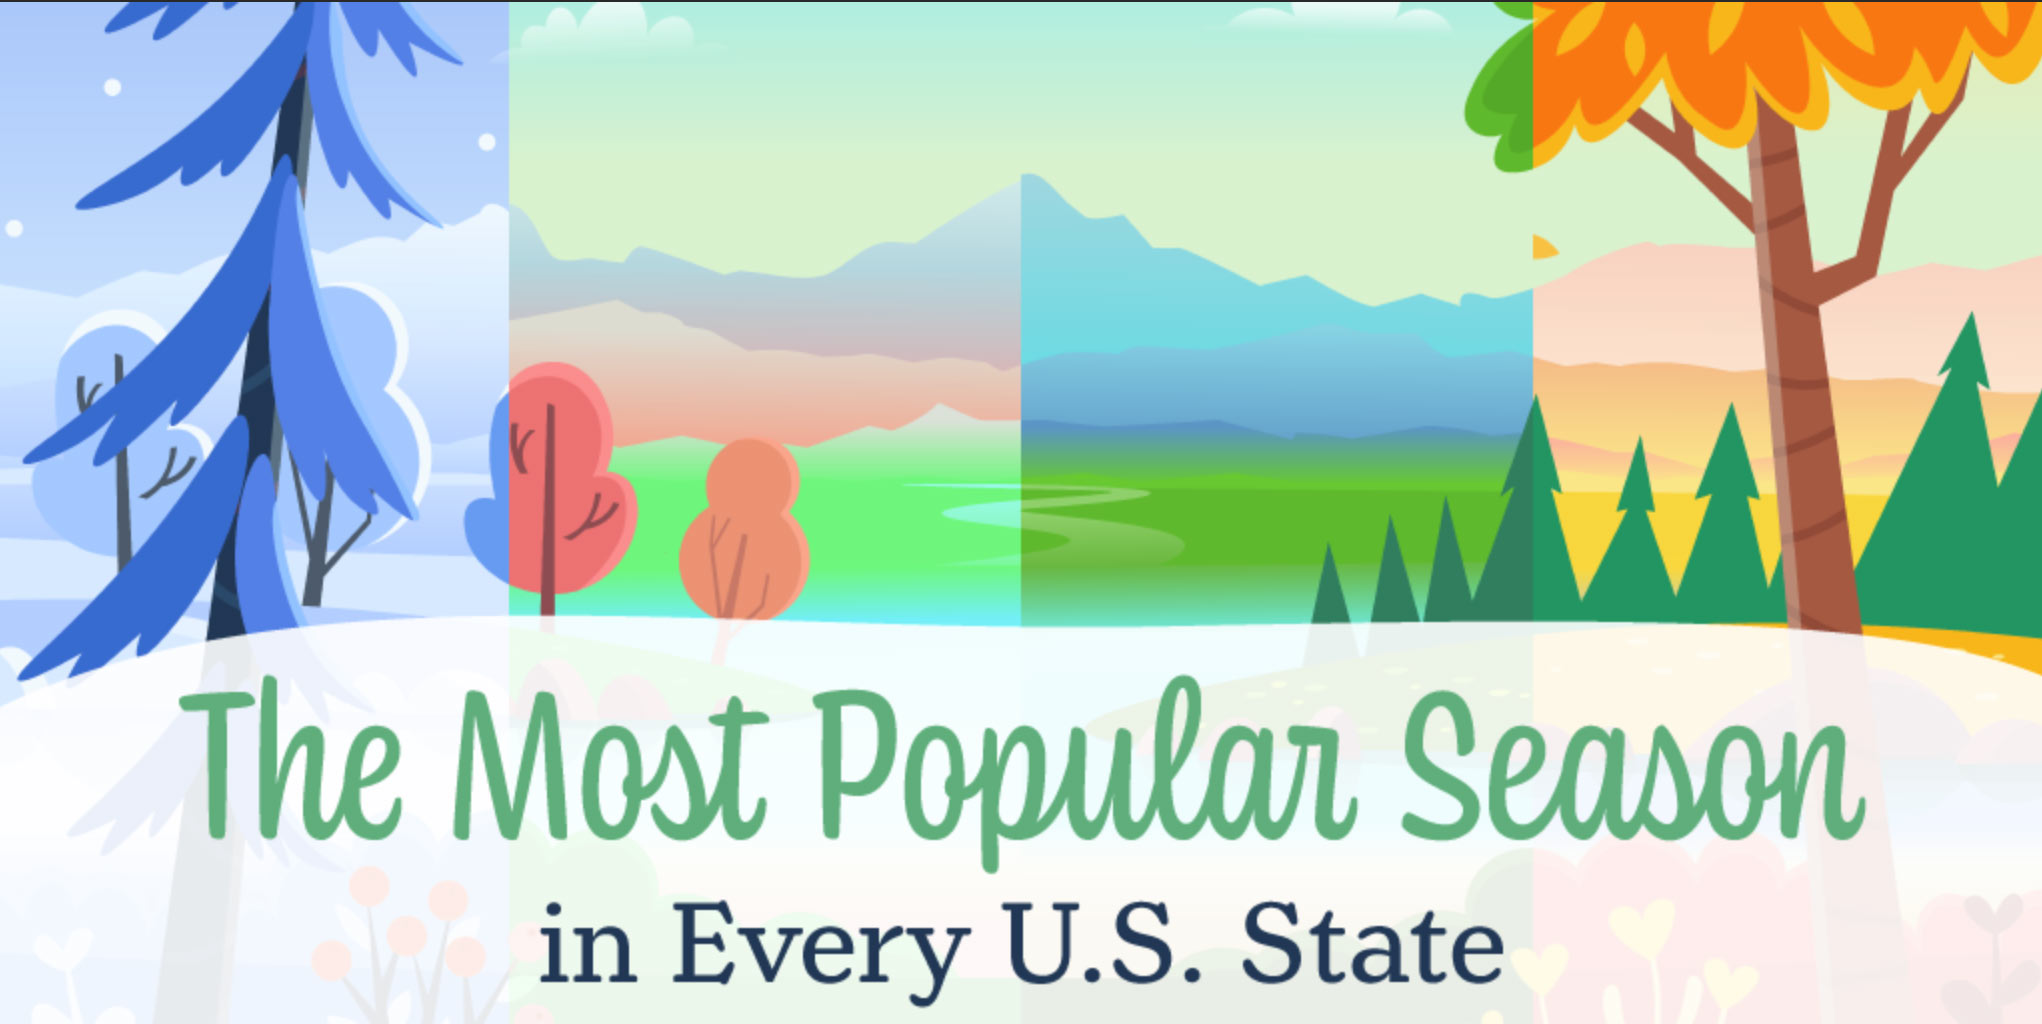 The Most Popular Season in Every U.S. State